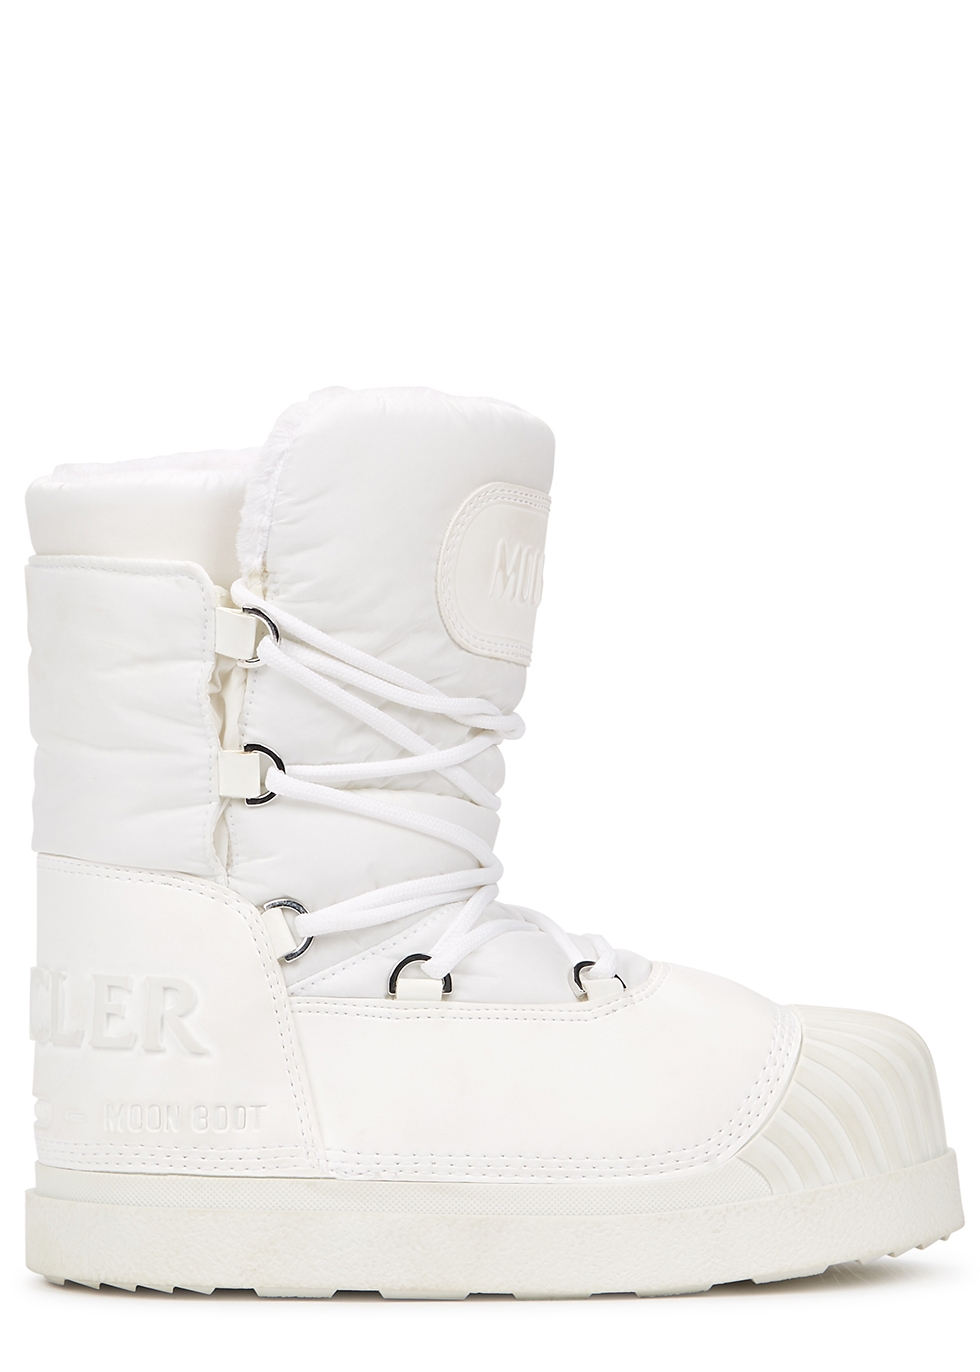 moncler white boots